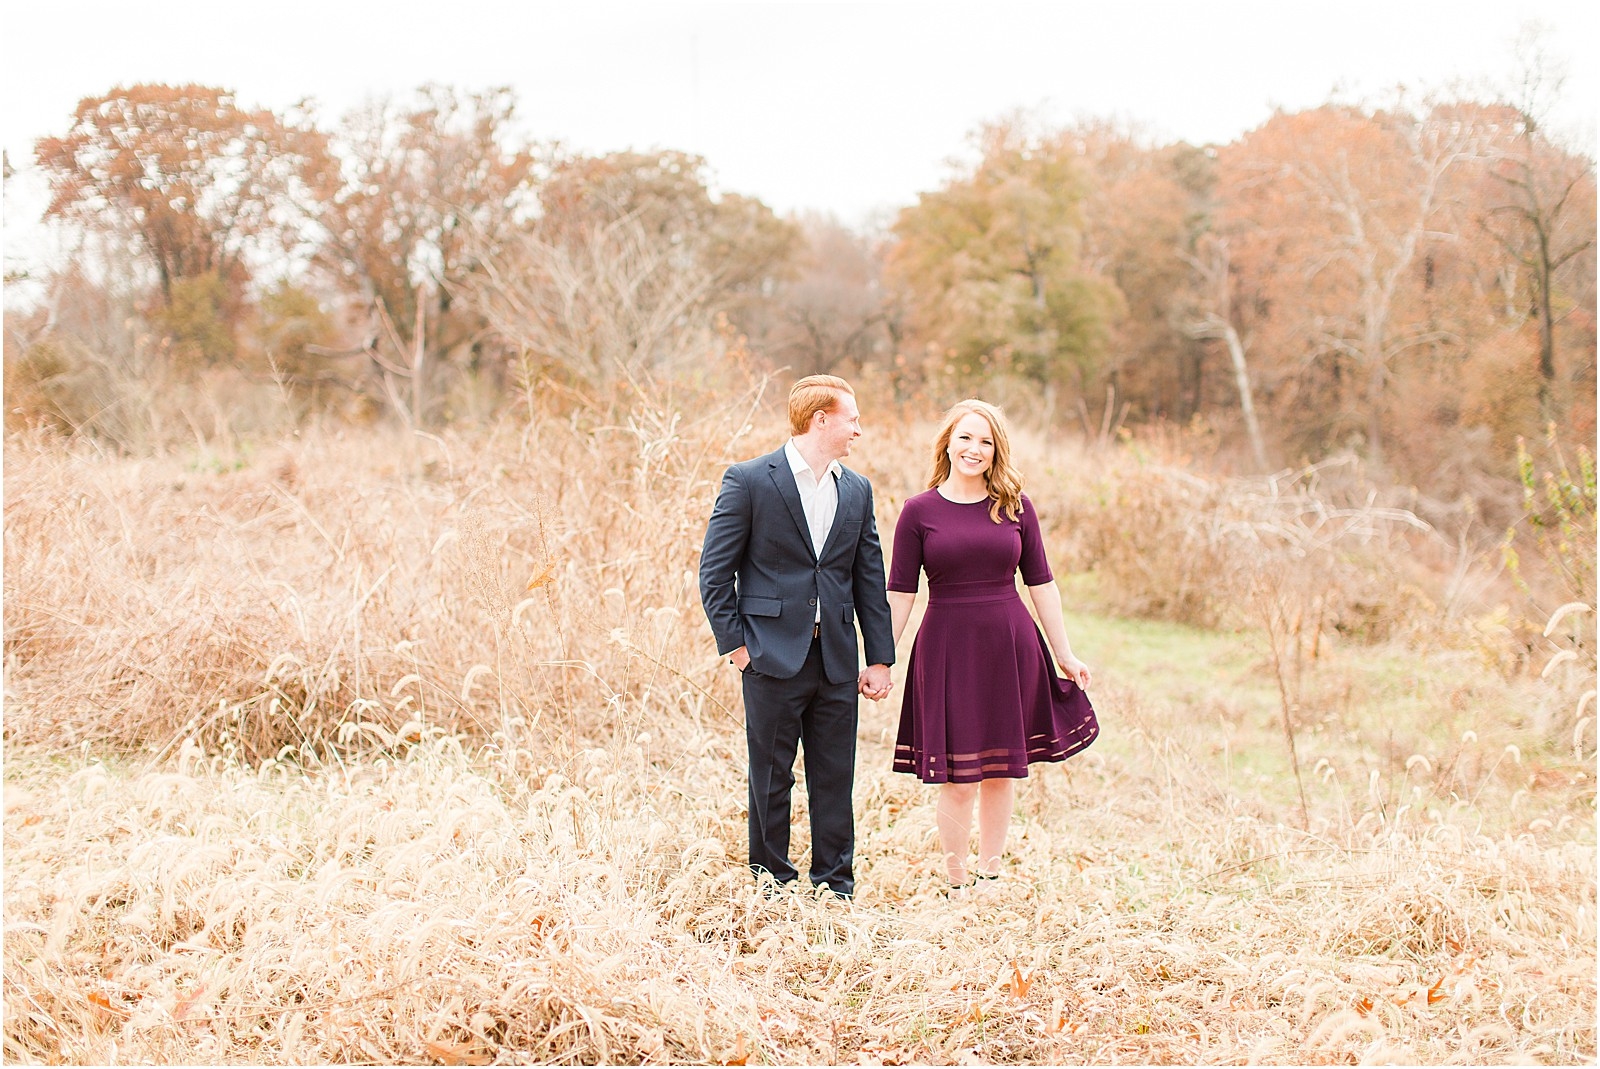 A Mesker Park Zoo Engagement Session | Jennah and Steve | Bret and Brandie Photography005.jpg